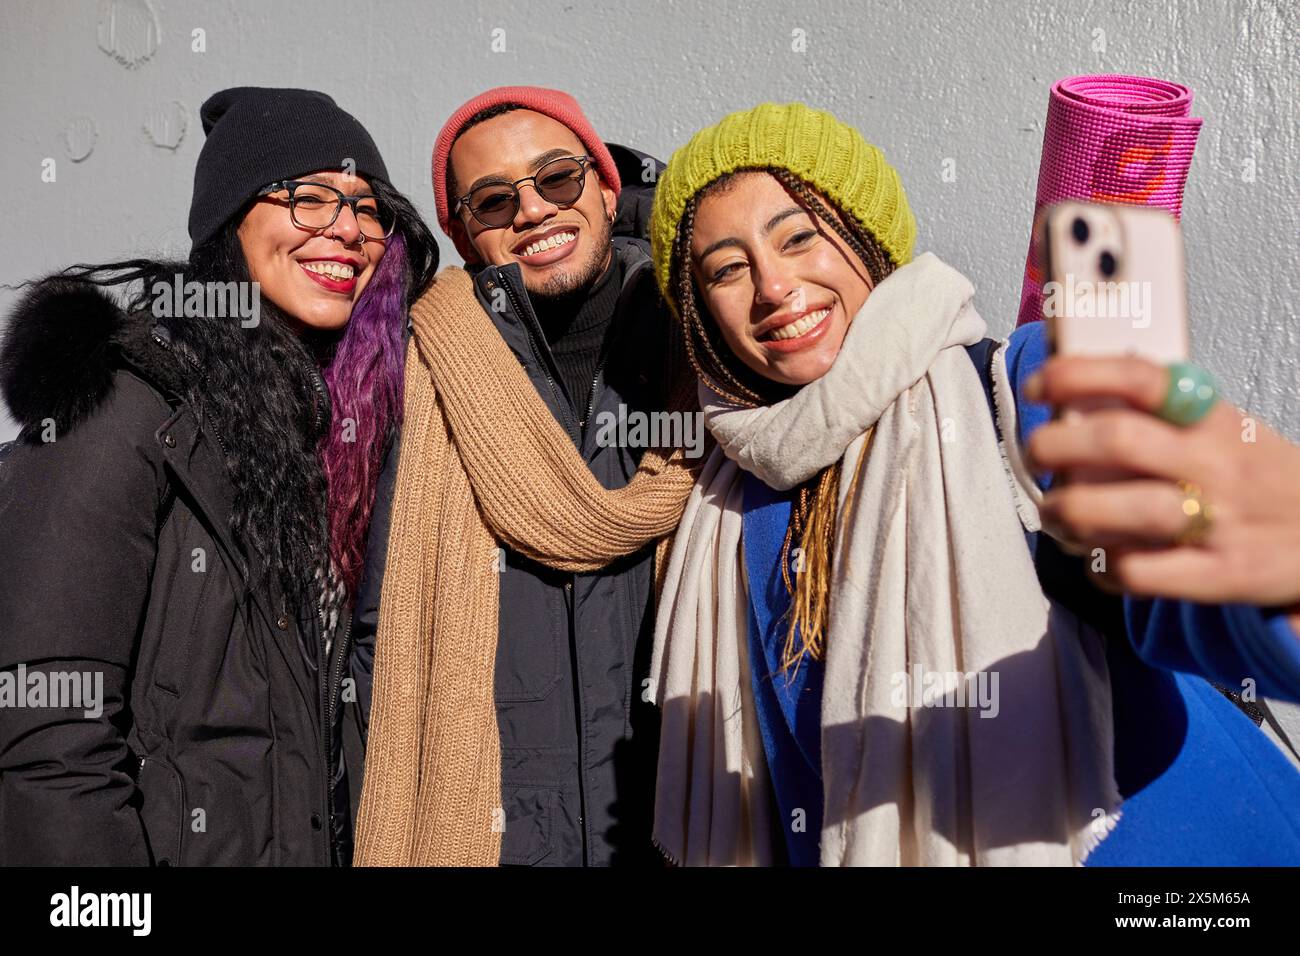 USA, New York City, Smiling friends in warm clothing taking selfie outdoors Stock Photo